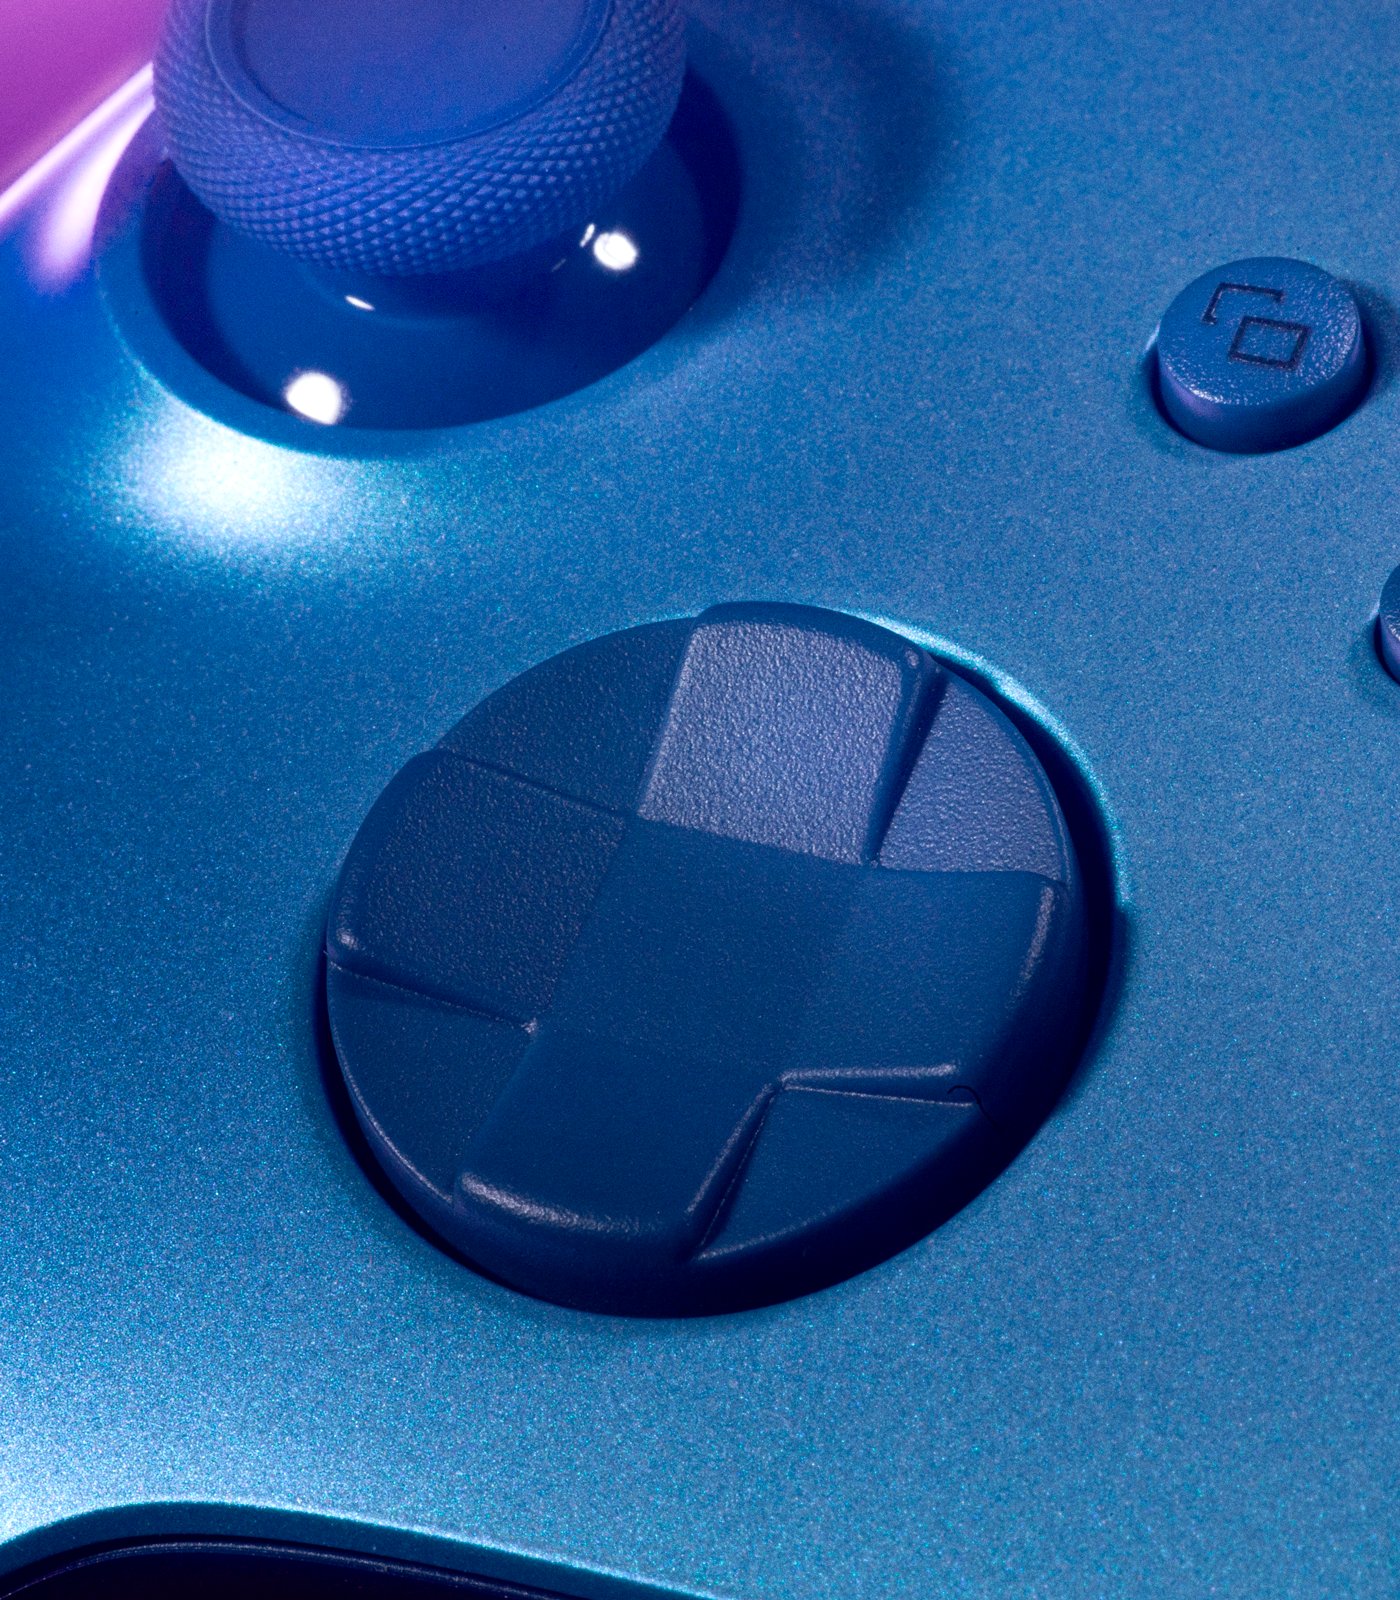 This Aqua Shift Special Edition blue Xbox controller look gorgeous